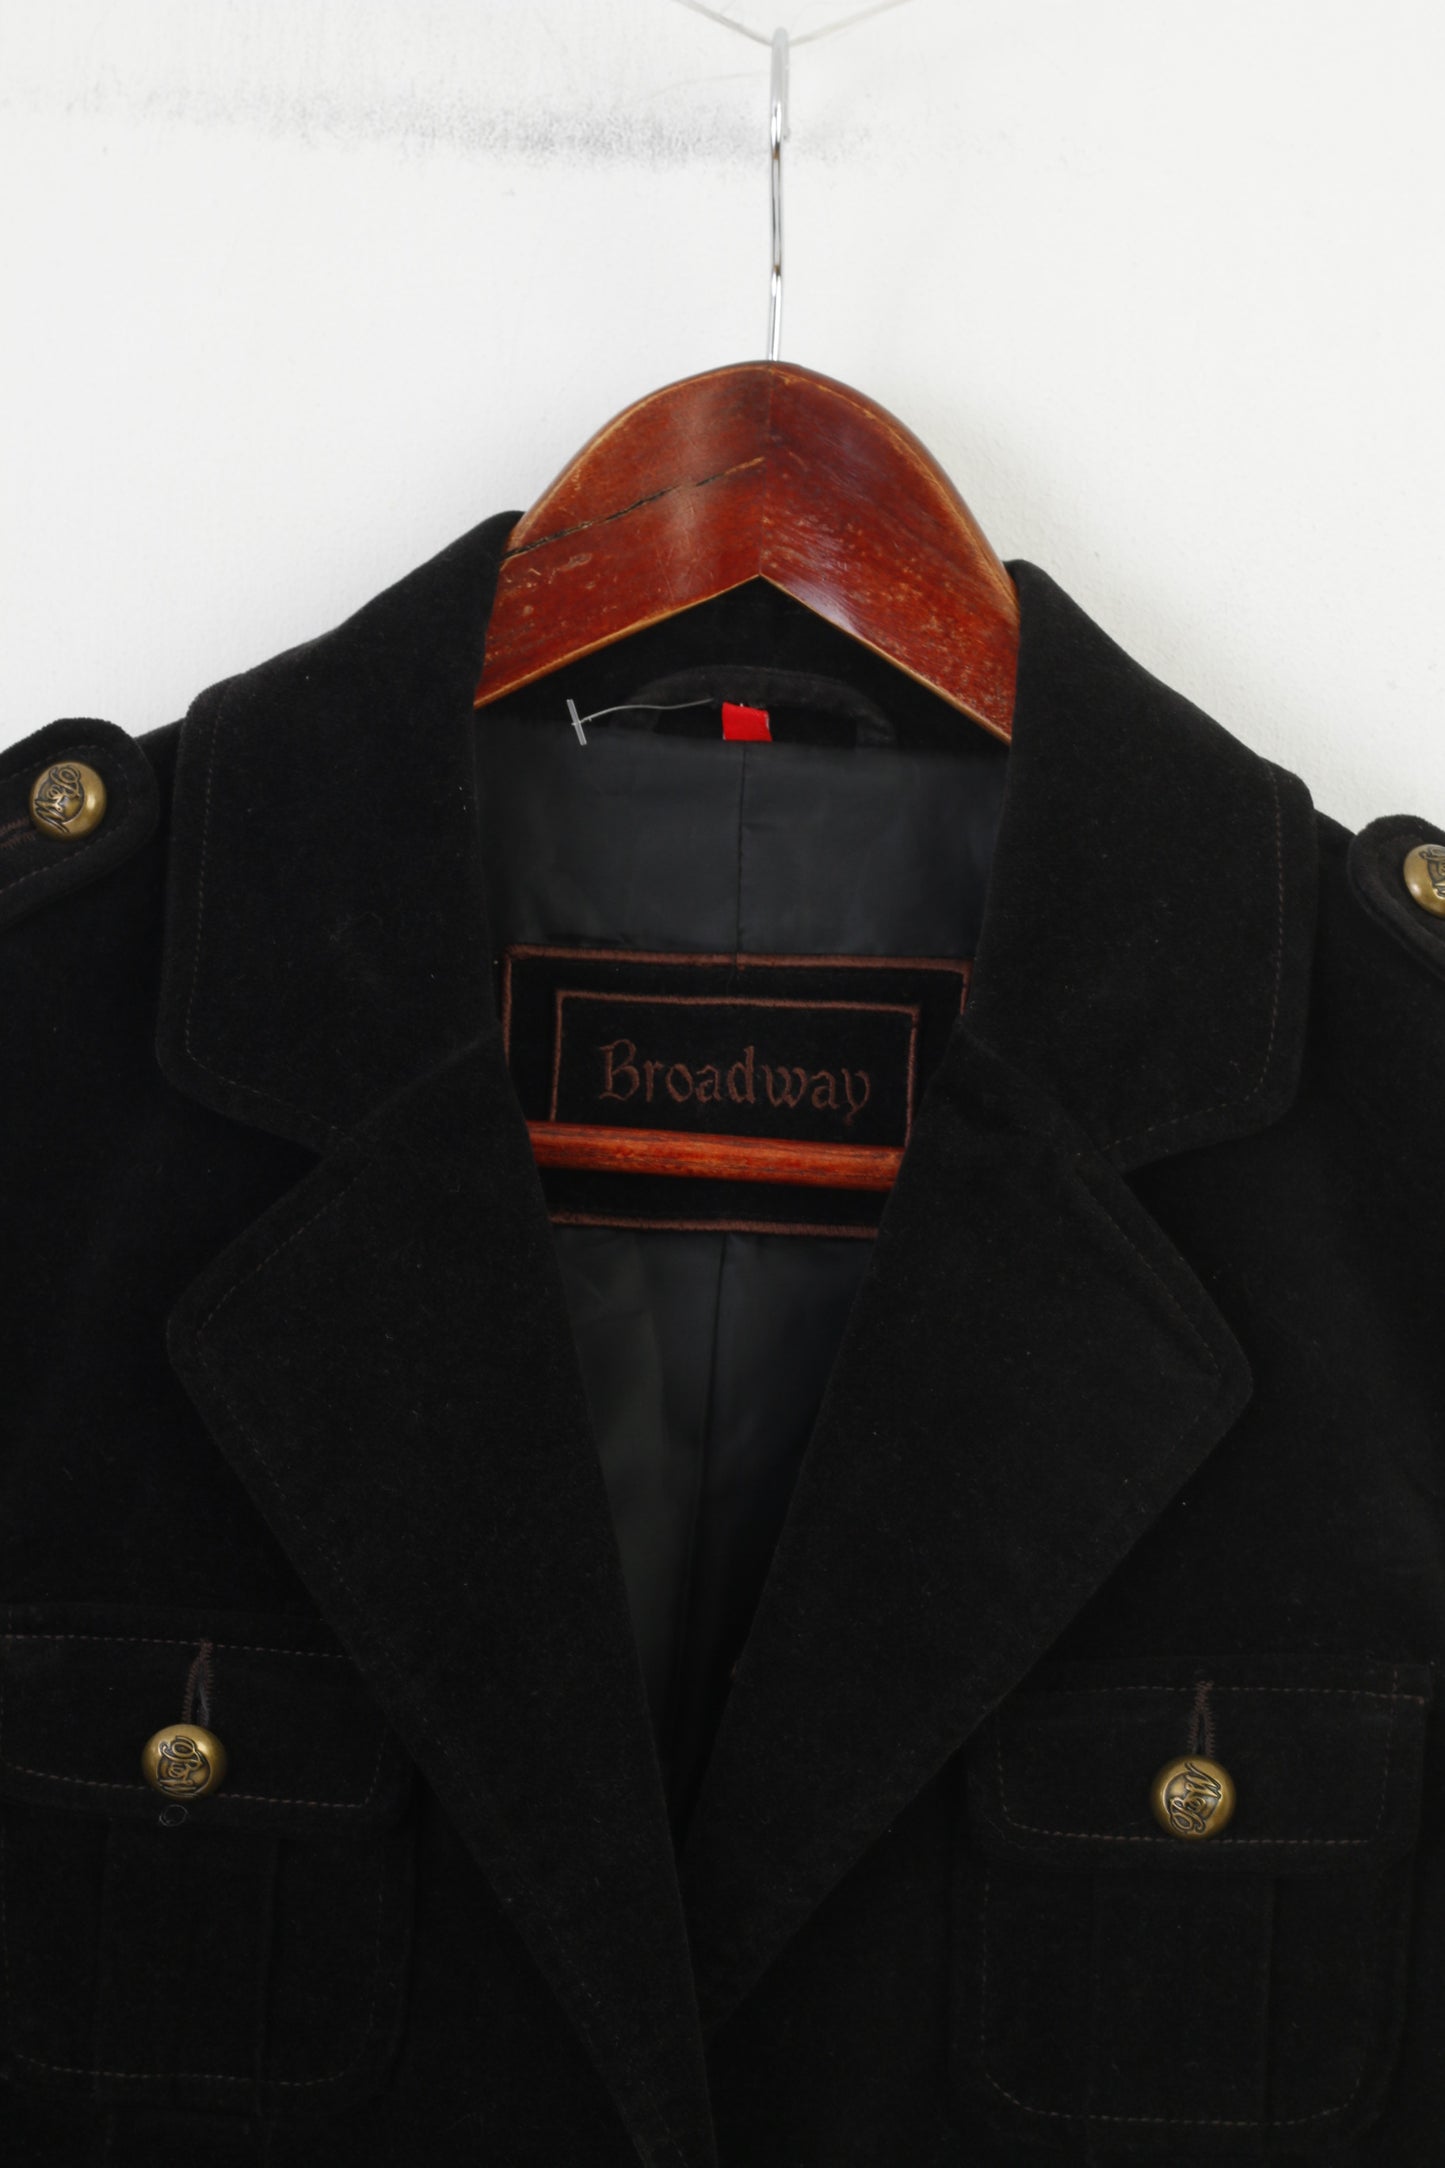 Broadway Women 38 M Jacket Black Gold Buttons Suede Cotton Vintage Collar Single Breasted Blazer Top